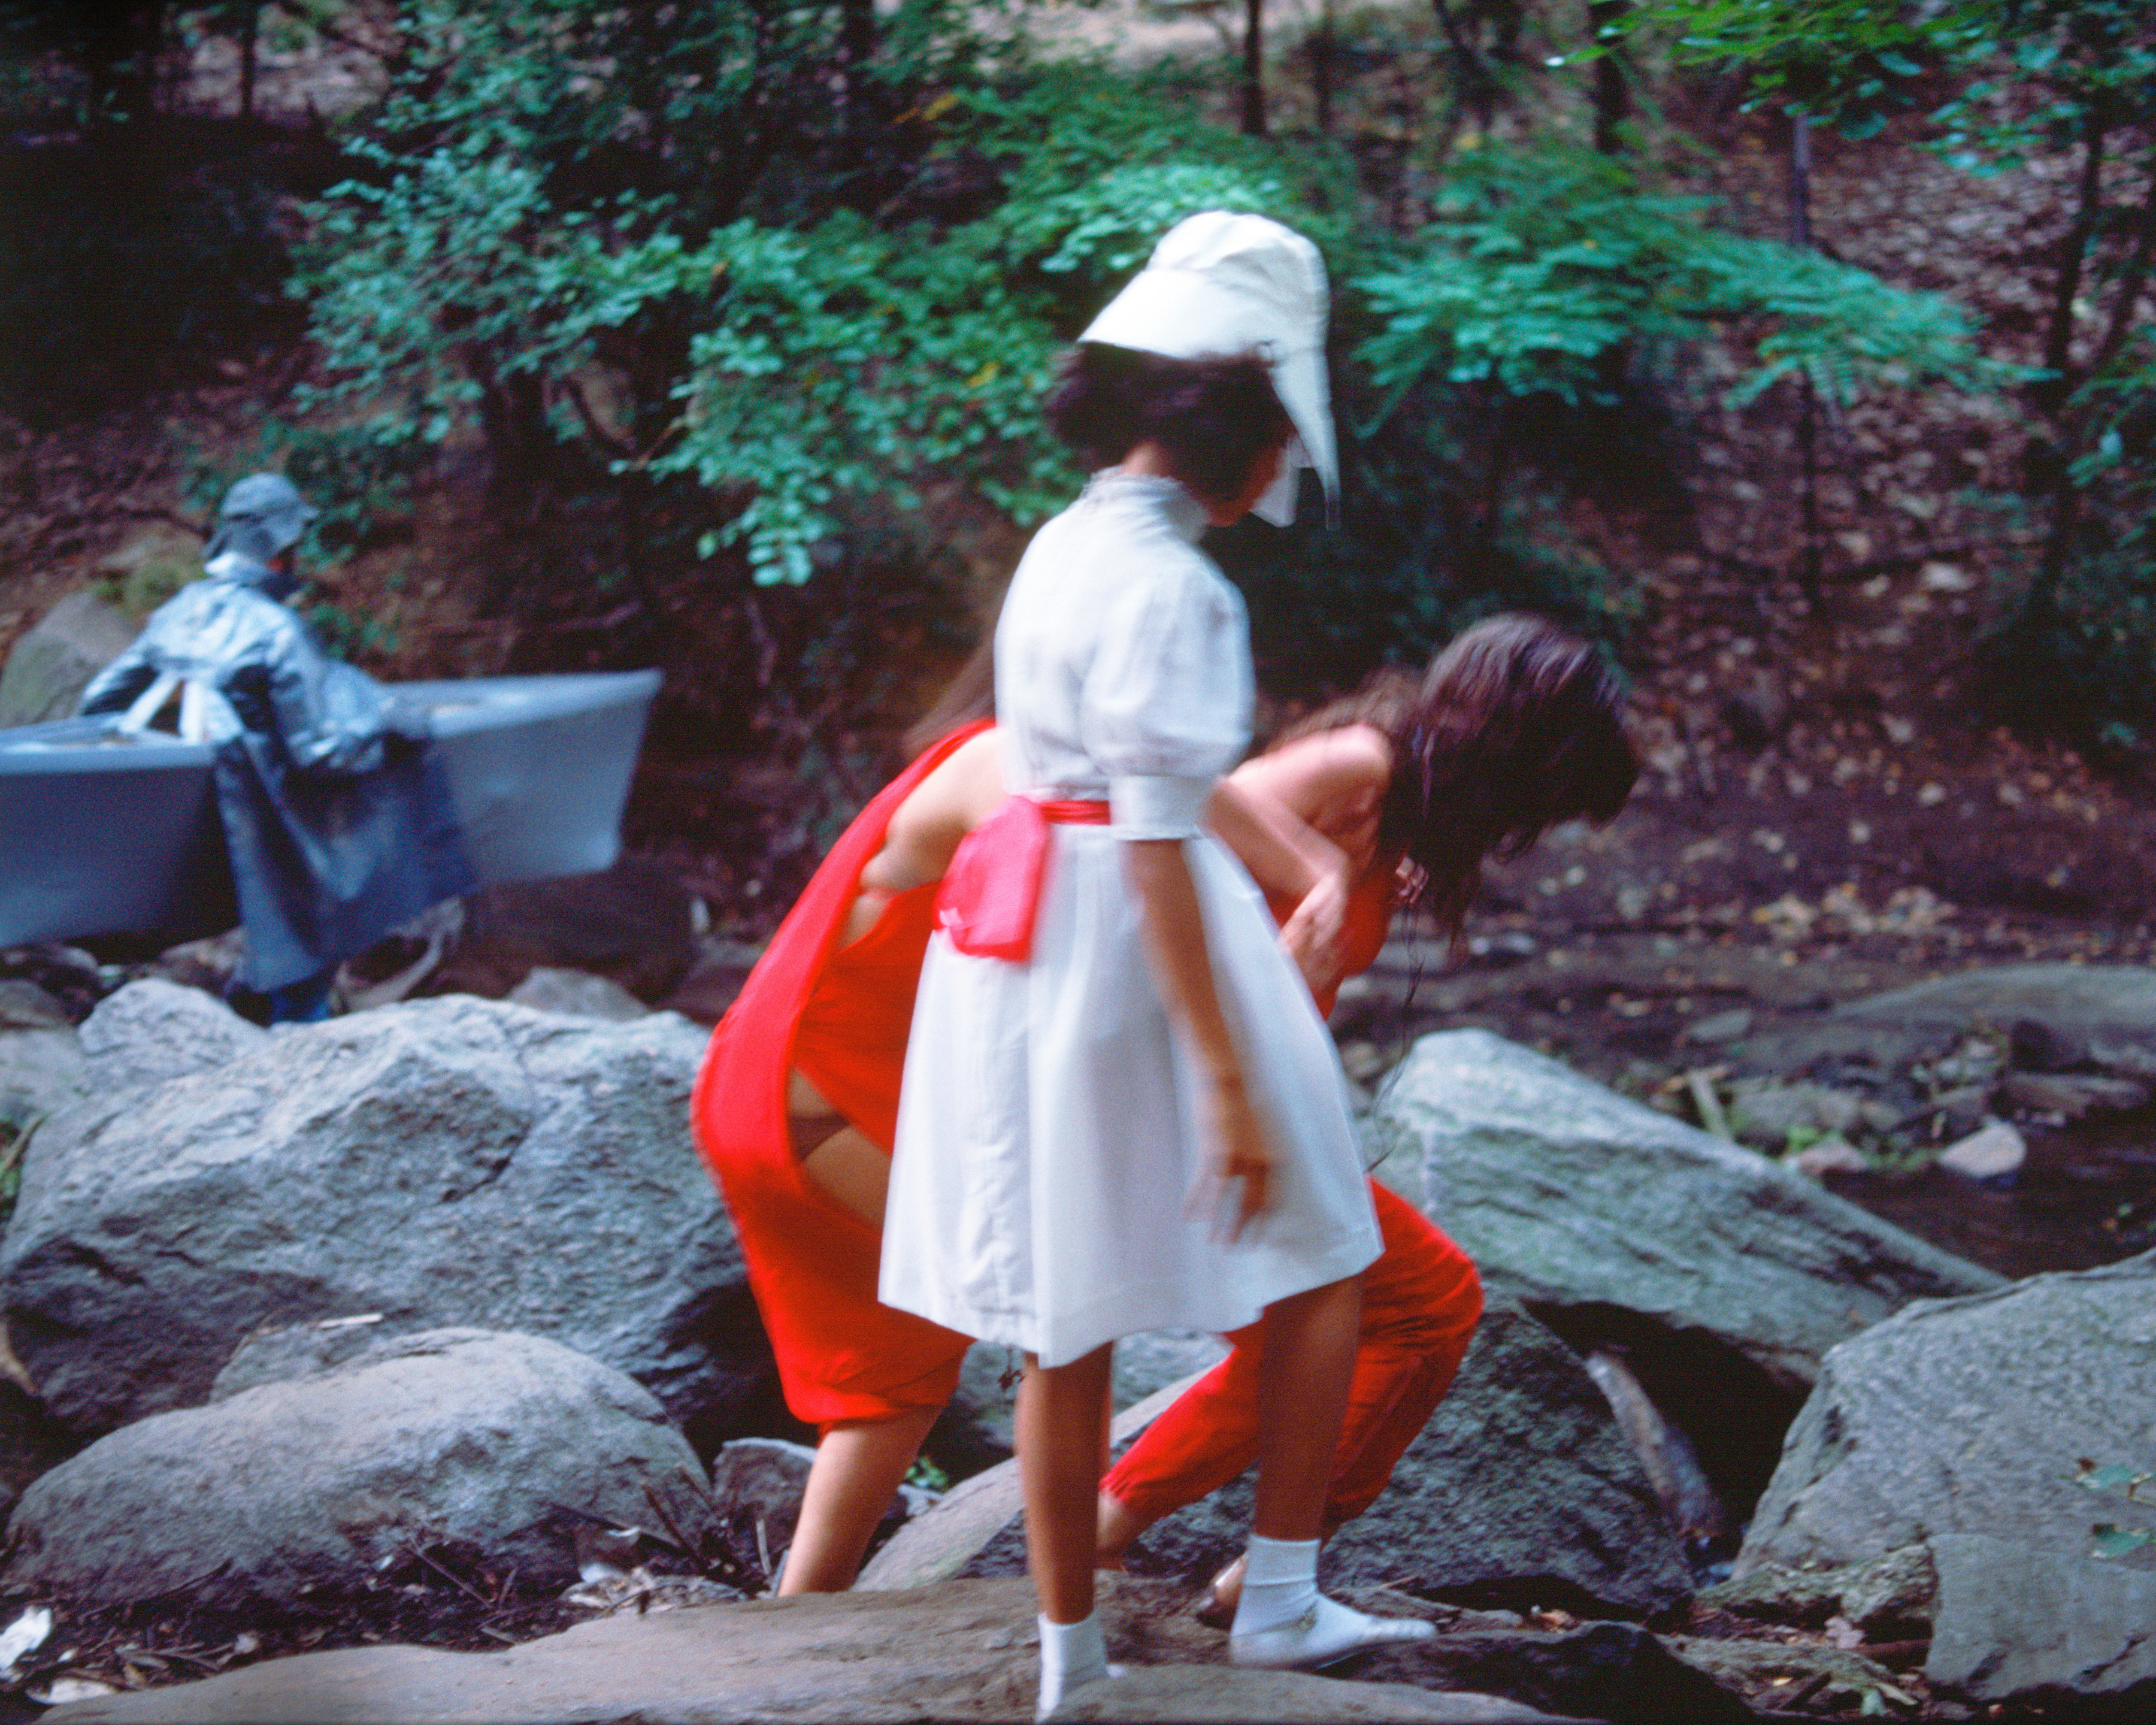 Rivers, First Draft: The Woman, the Teenager in Magenta, and the Little Girl in Pink Sash steady each other&rsquo;s footing, 1982/2015, Digital C-print from Kodachrome 35mm slides in 48 parts, 16h x 20w in (40.64h x 50.80w cm)